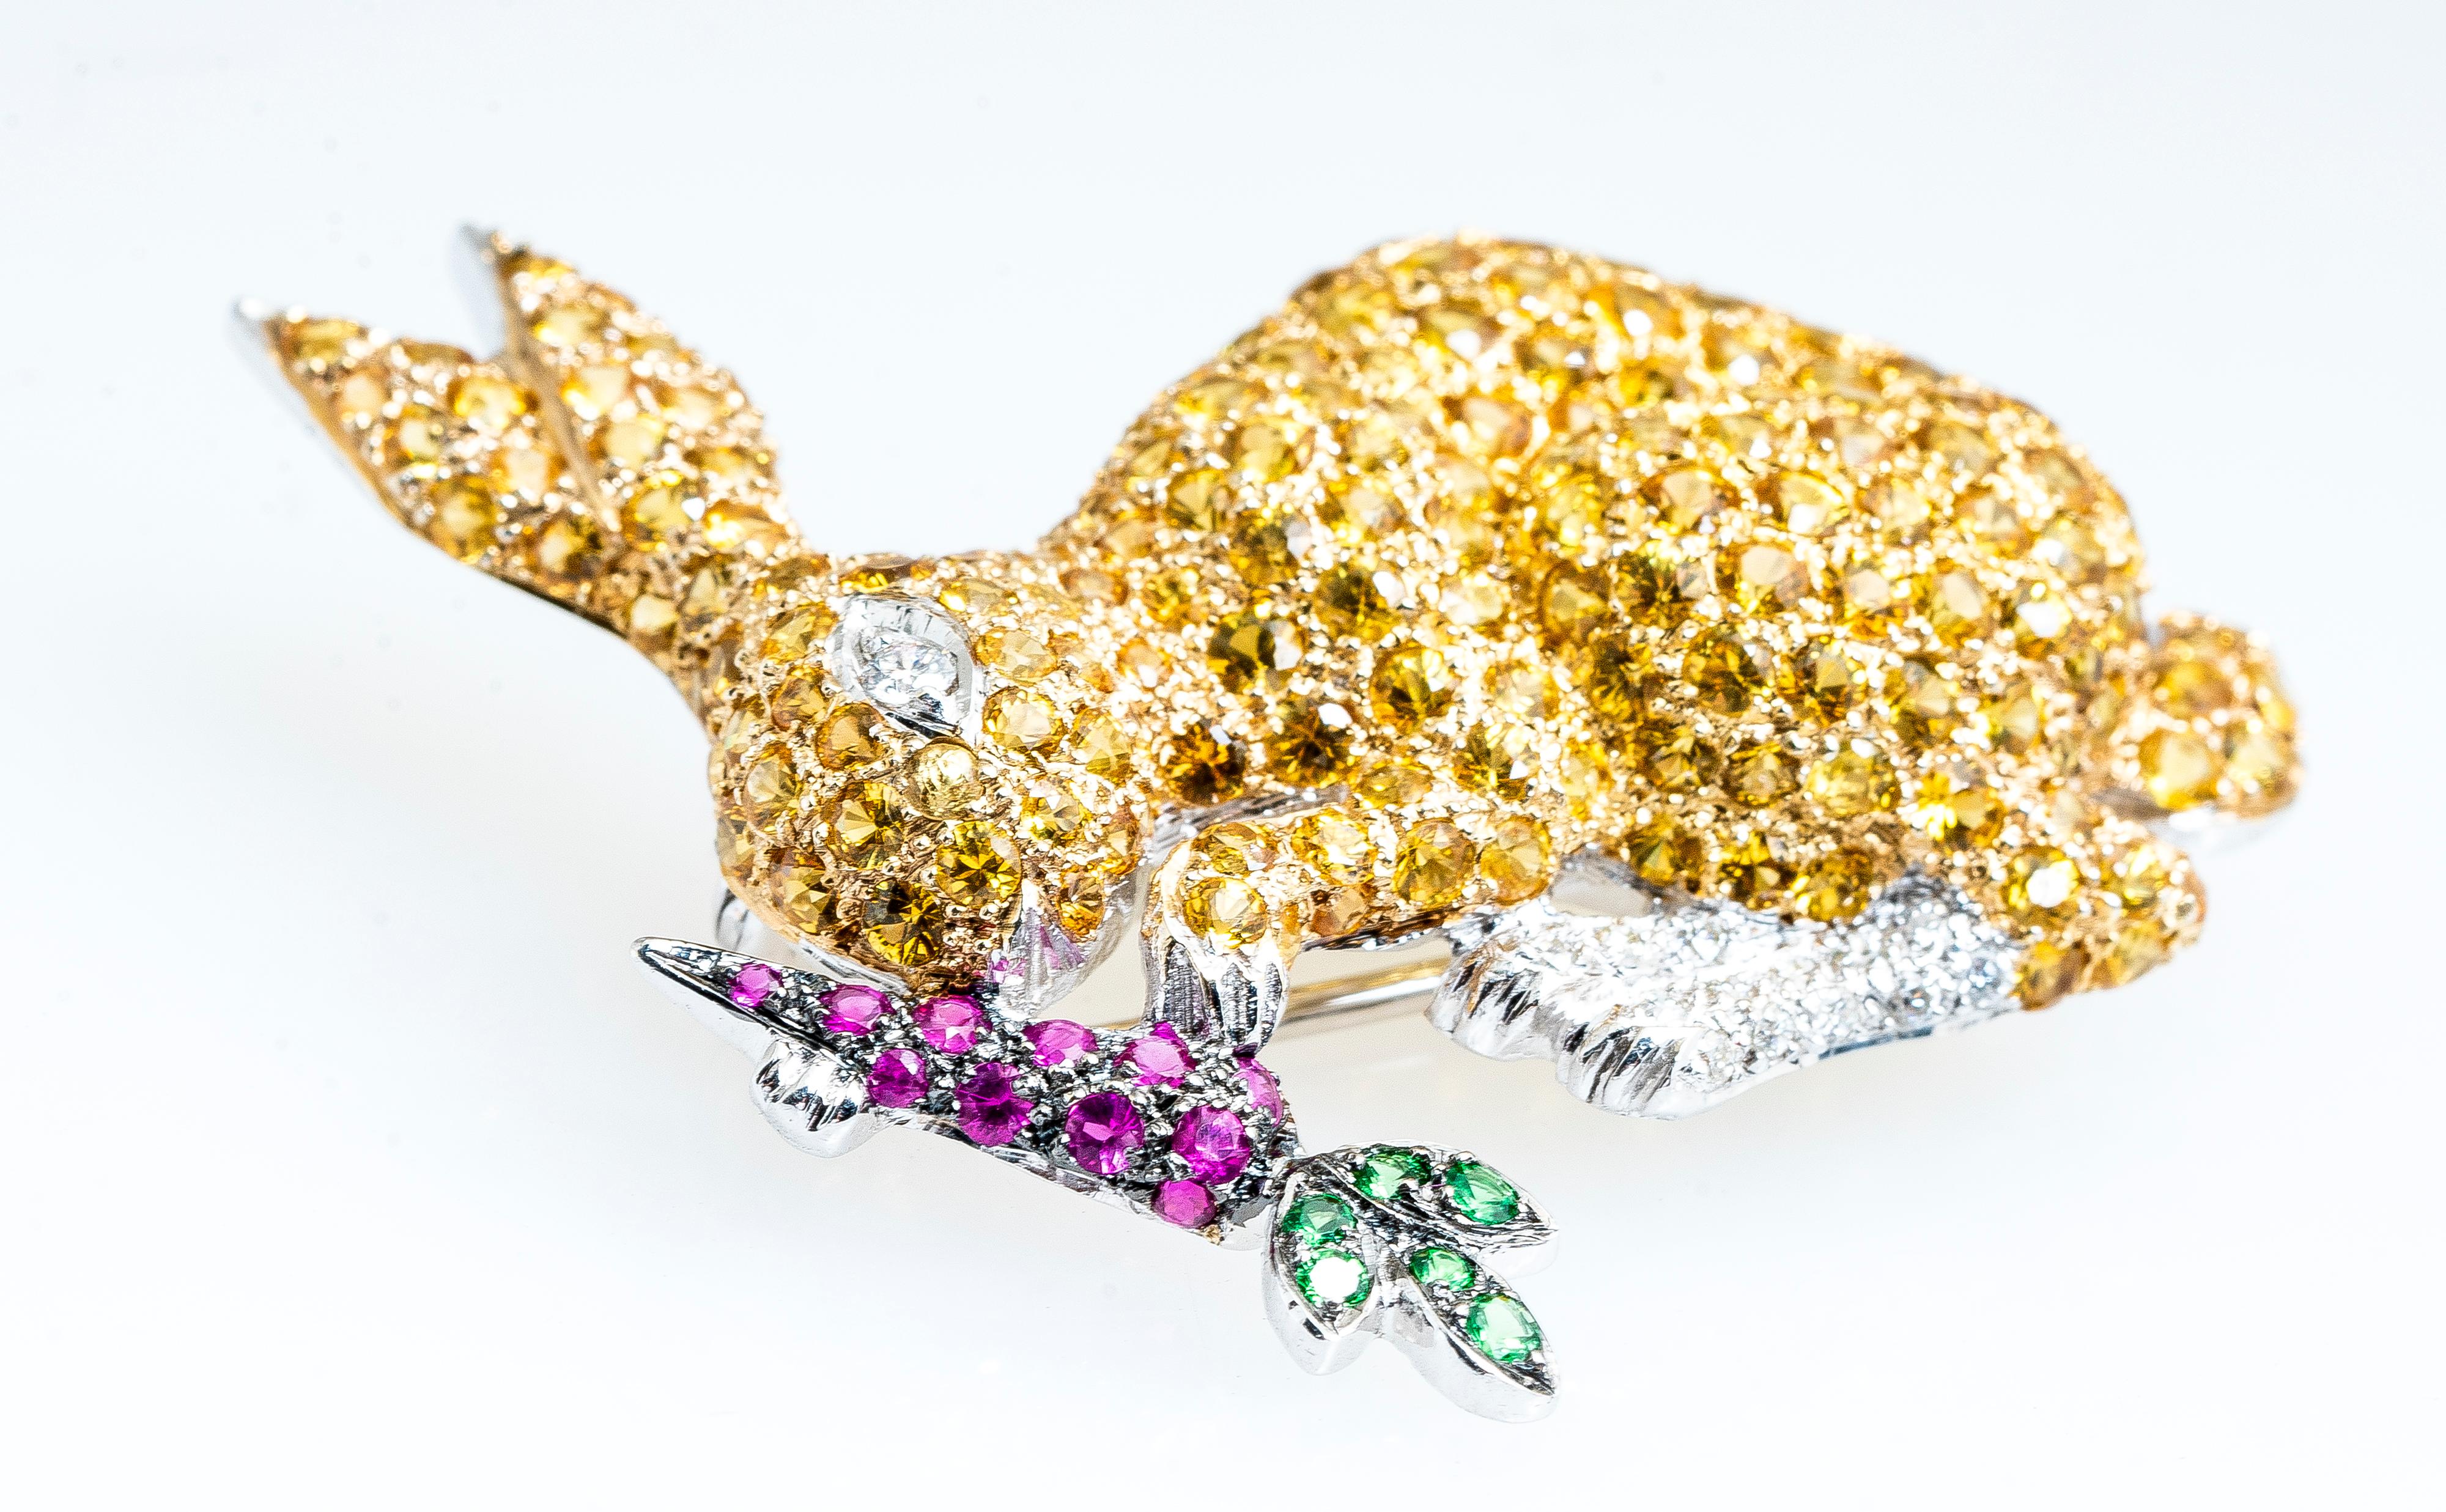 Vintage 18ky yellow sapphire, diamond, ruby and tsavorite bunny rabbit eating a carrot brooch/pin.   The rabbit body is made up of pave yellow sapphires and round diamonds for the eyes and feet.  The carrot is pave rubies and tsavorite for the green